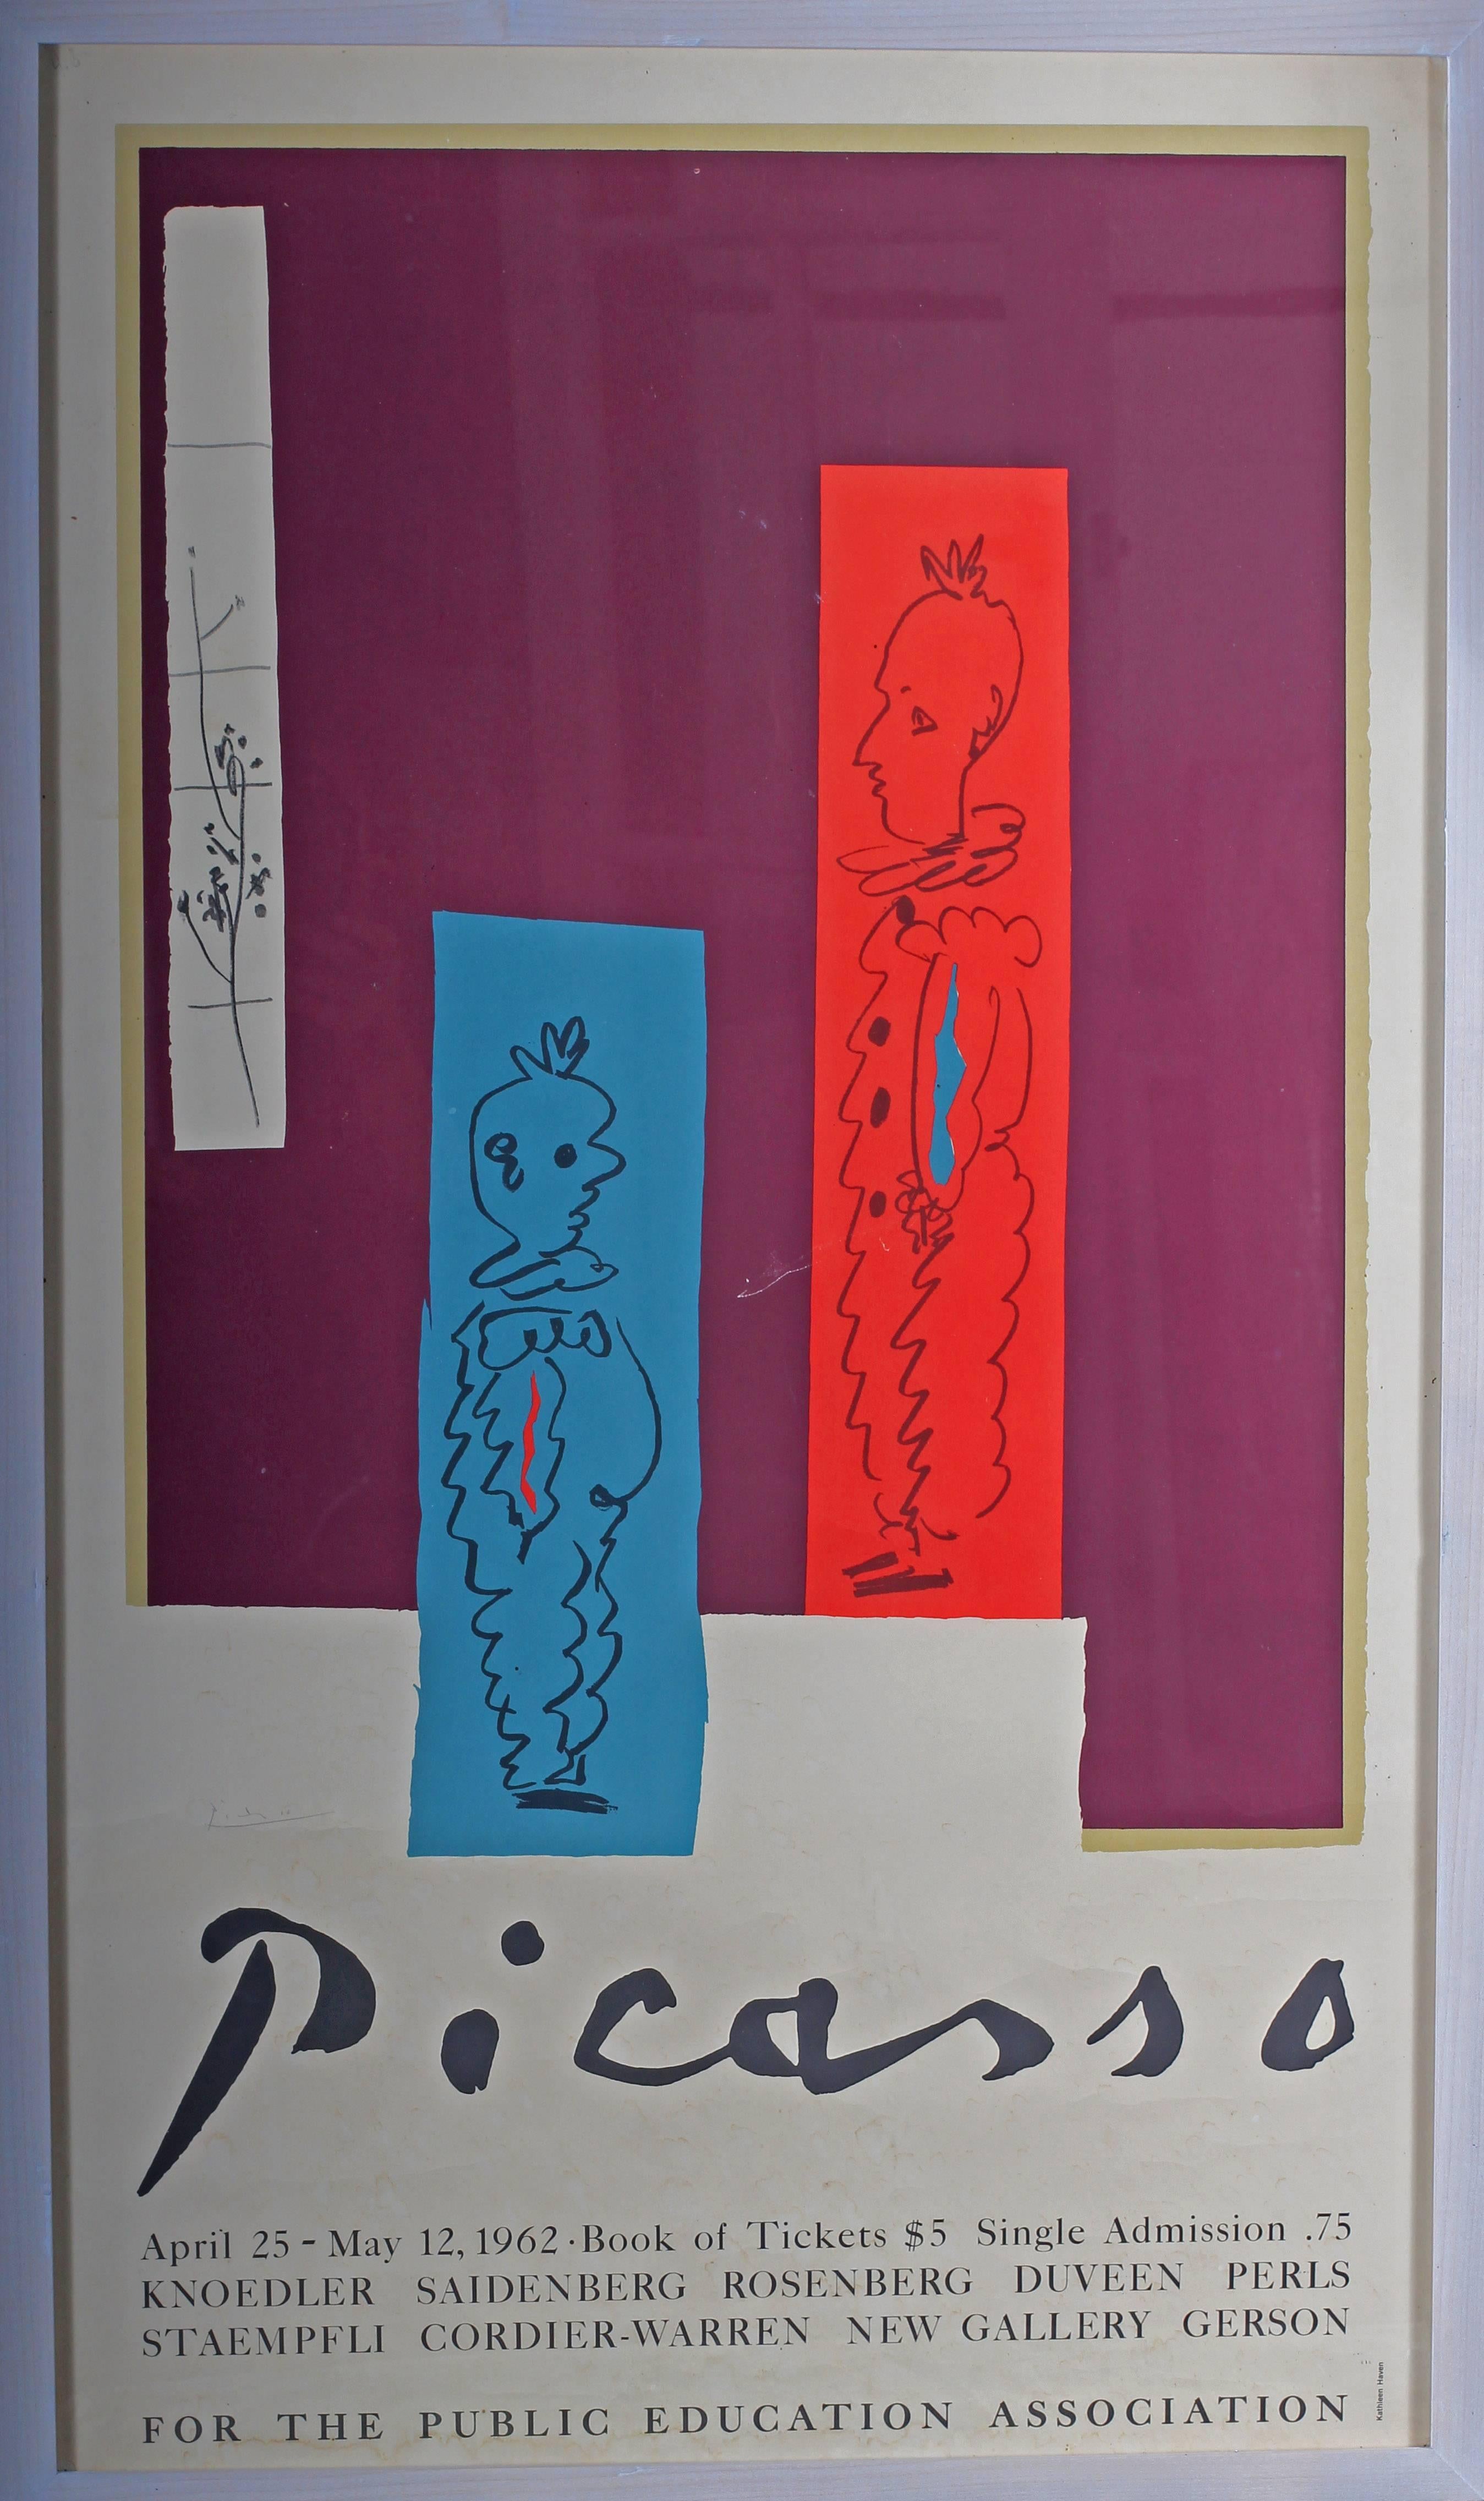 (after) Pablo Picasso Abstract Print - Vintage Picasso exhibition poster with reds, blues and purples